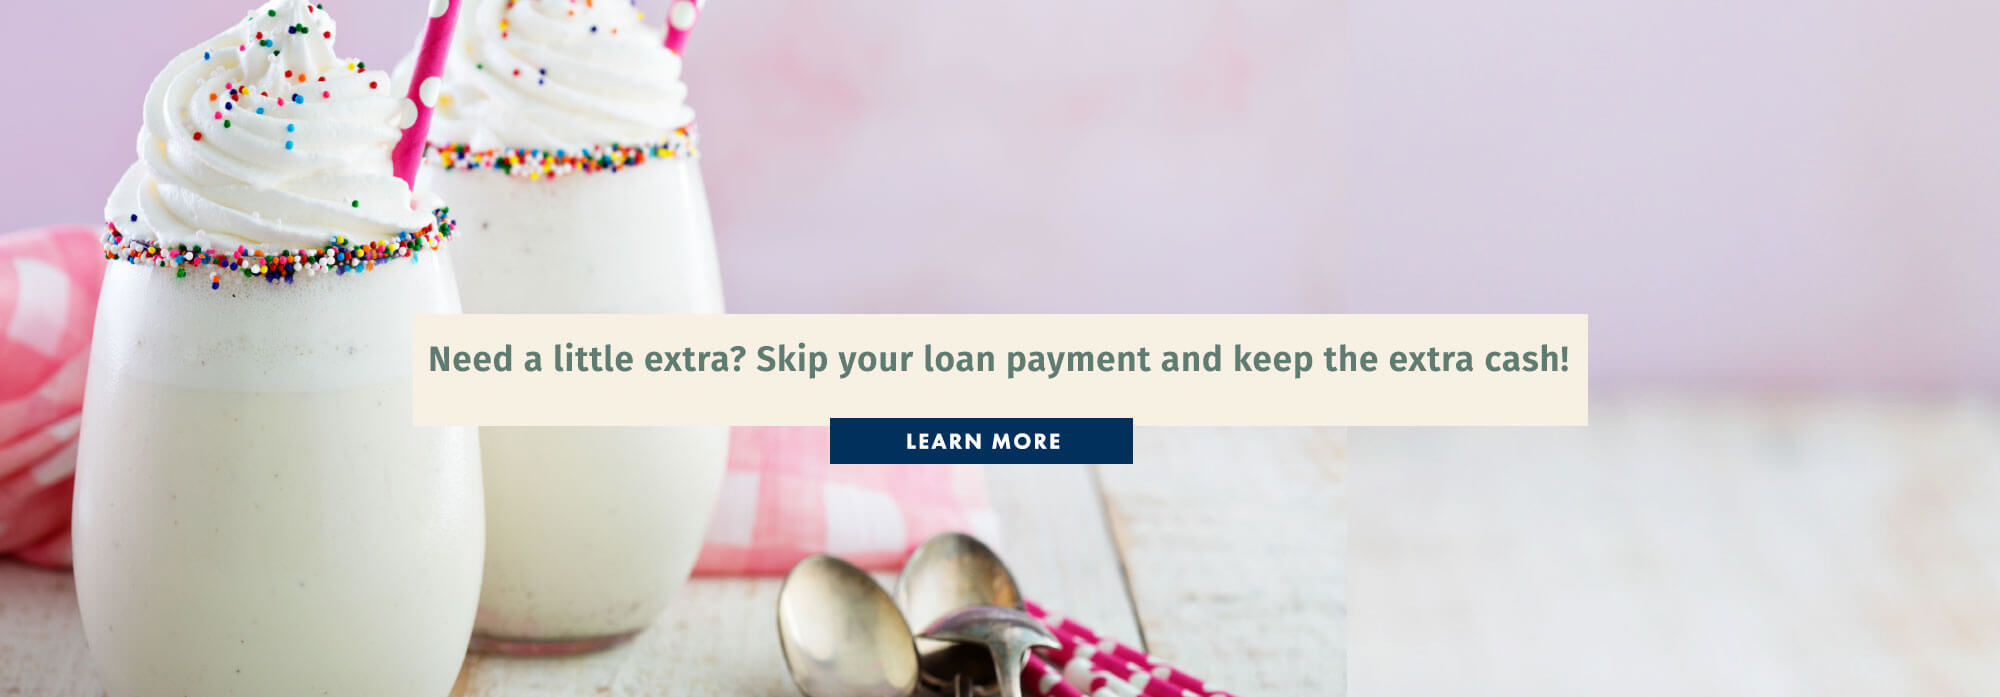 Need a little extra? Skip your loan payment and keep the extra cash!